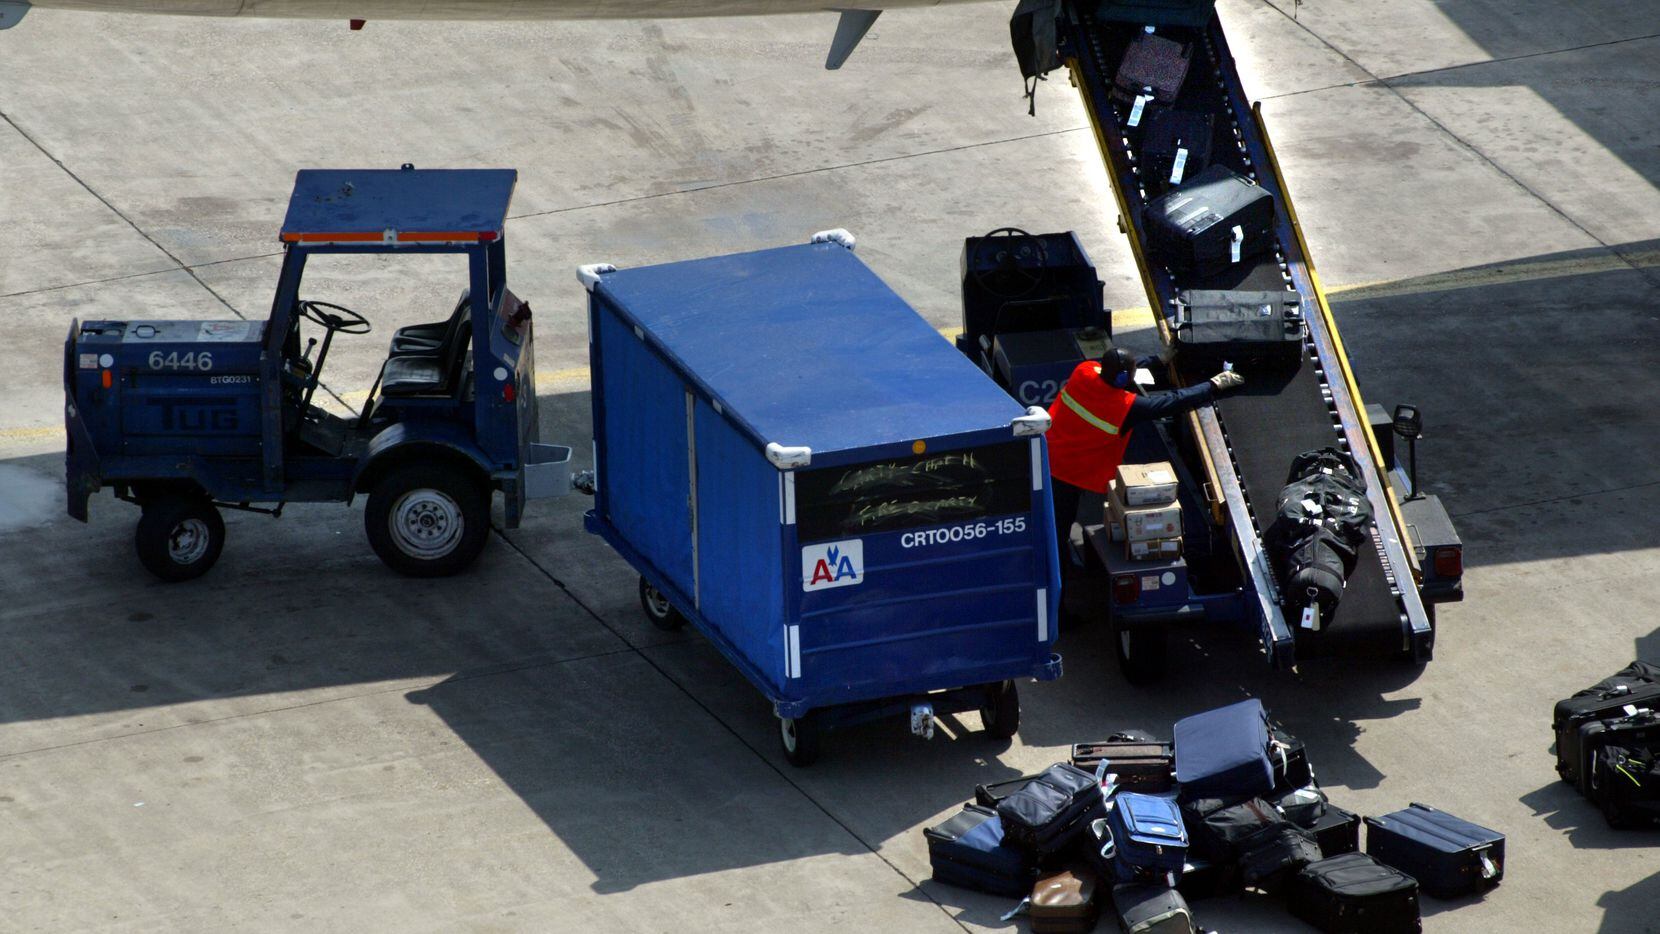 ORG XMIT: *S0405533084* Tuesday, March 11, 2003   #44340A baggage handler unloads luggage from an American Airlines flight arriving at DFW Airport.